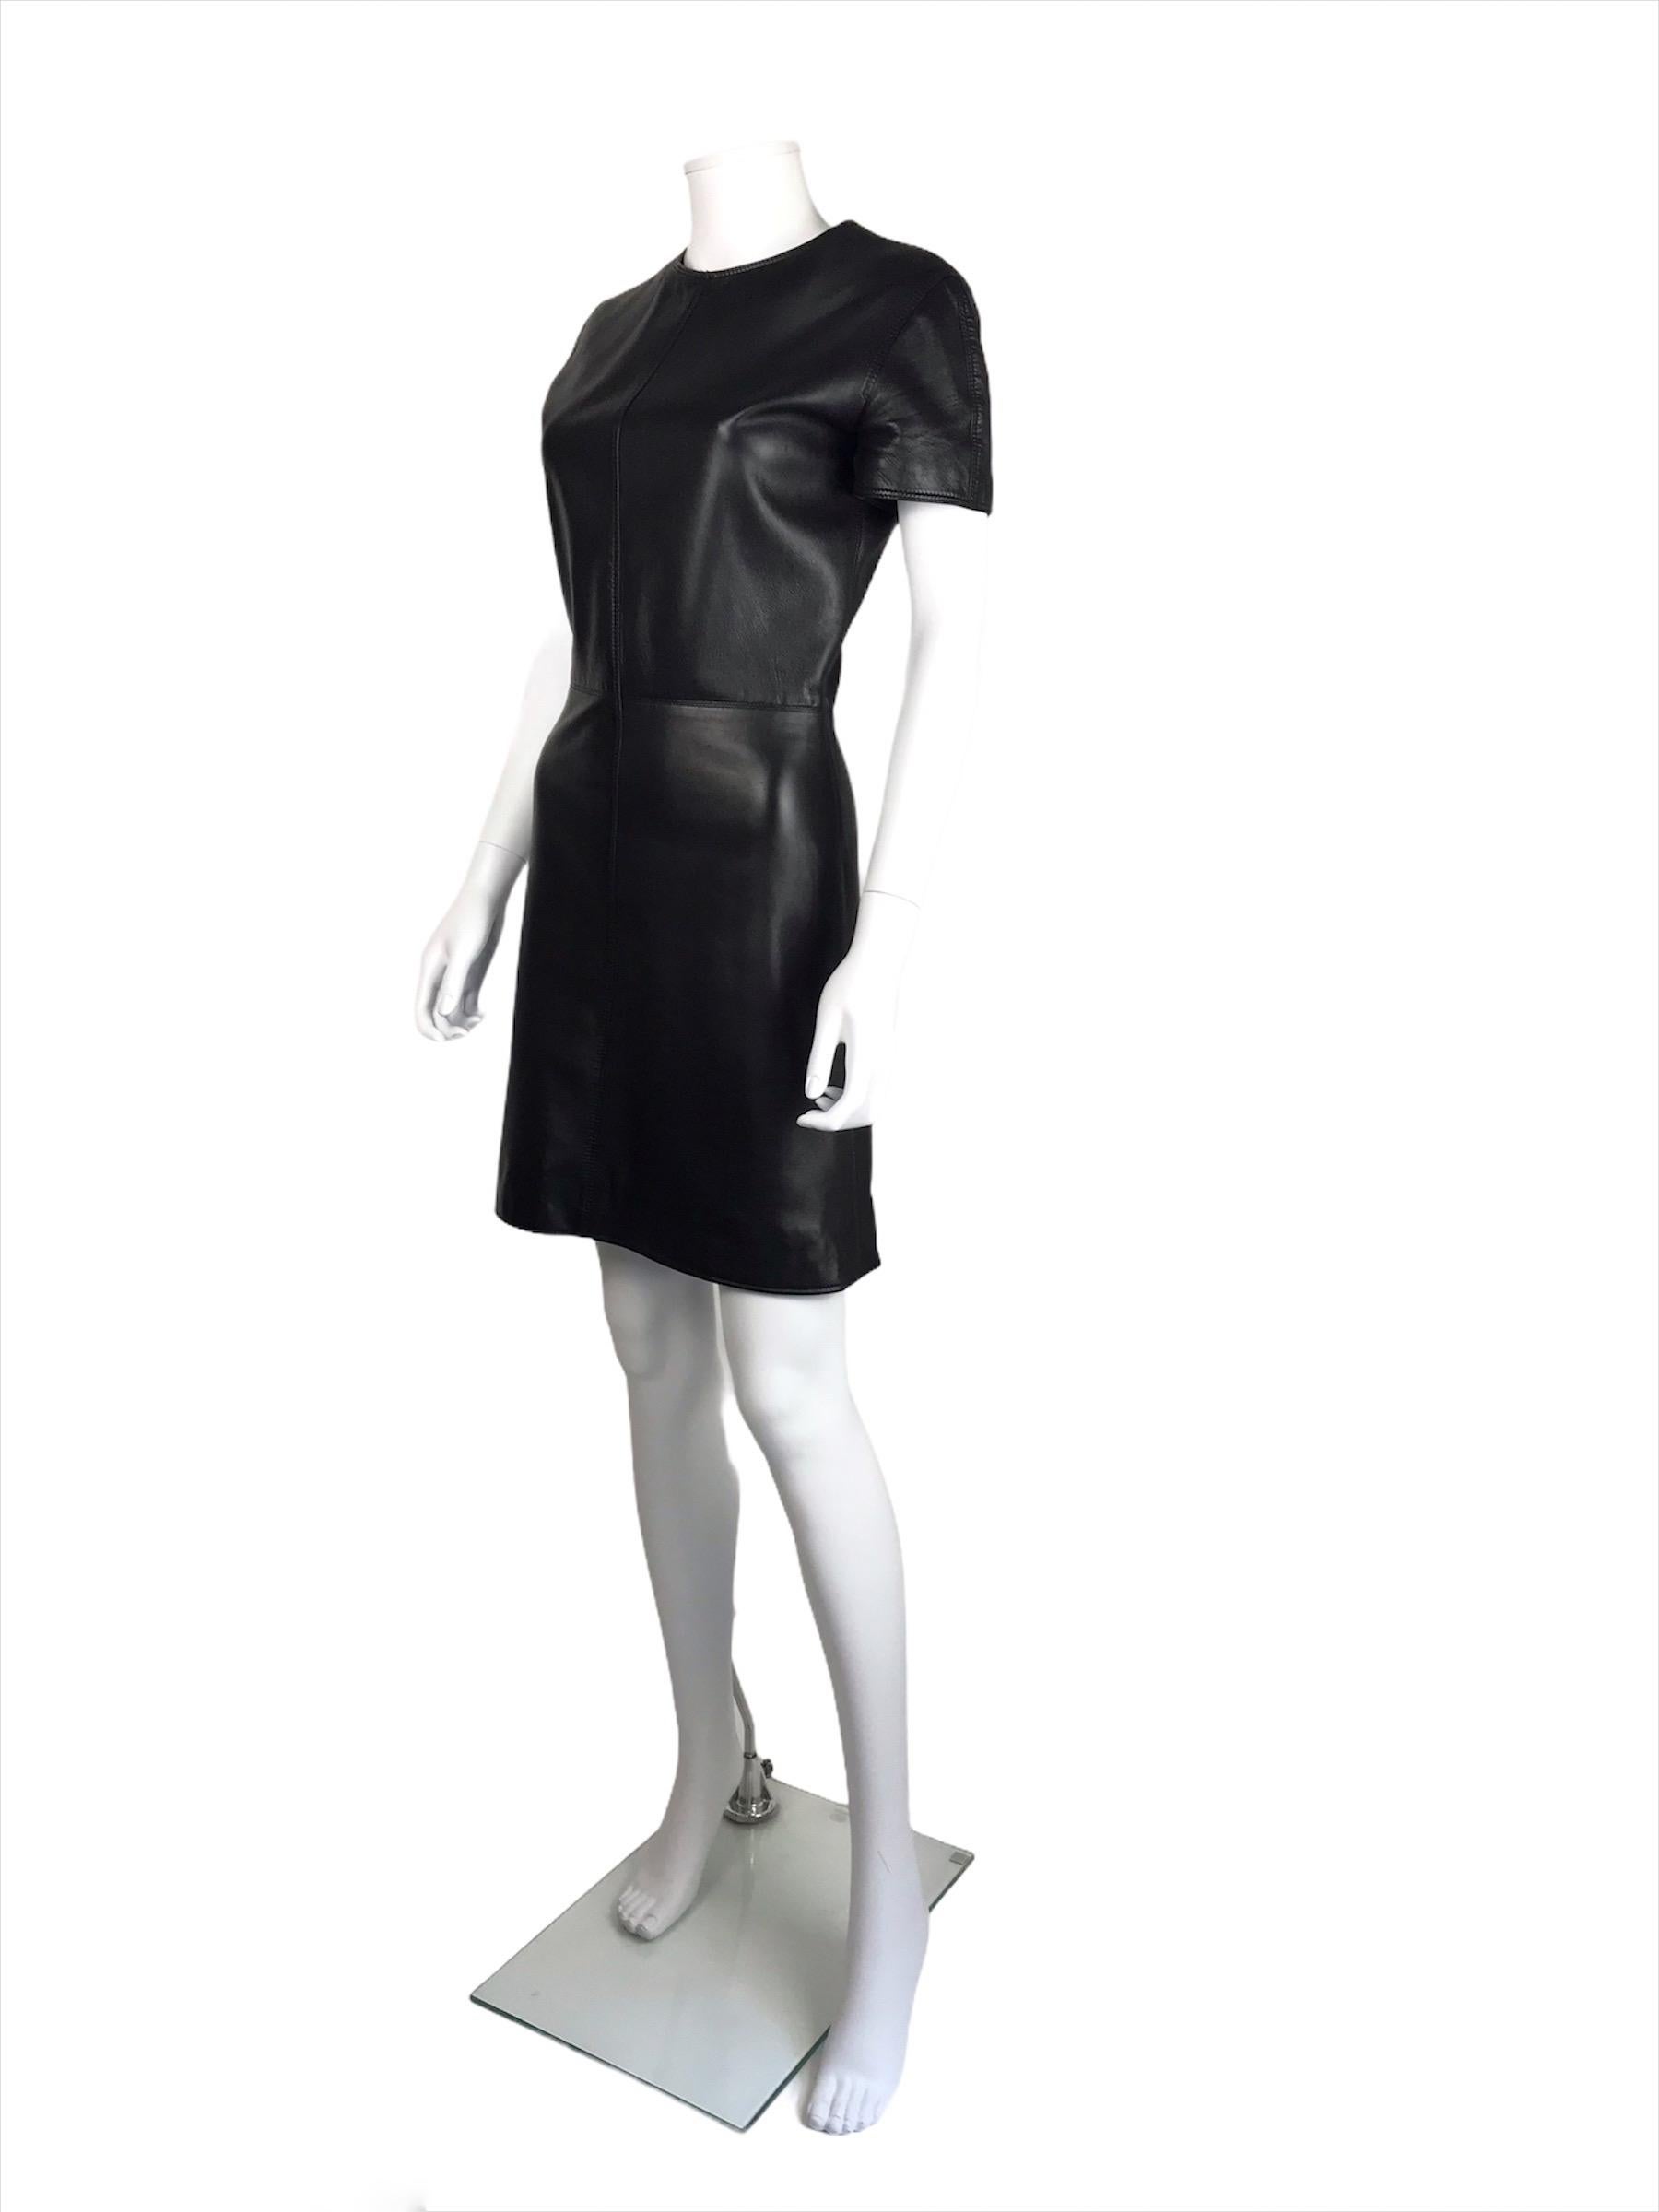 Women's SS 1996 Gianni Versace Leather Dress Small / Shot by Richard Avedon  For Sale